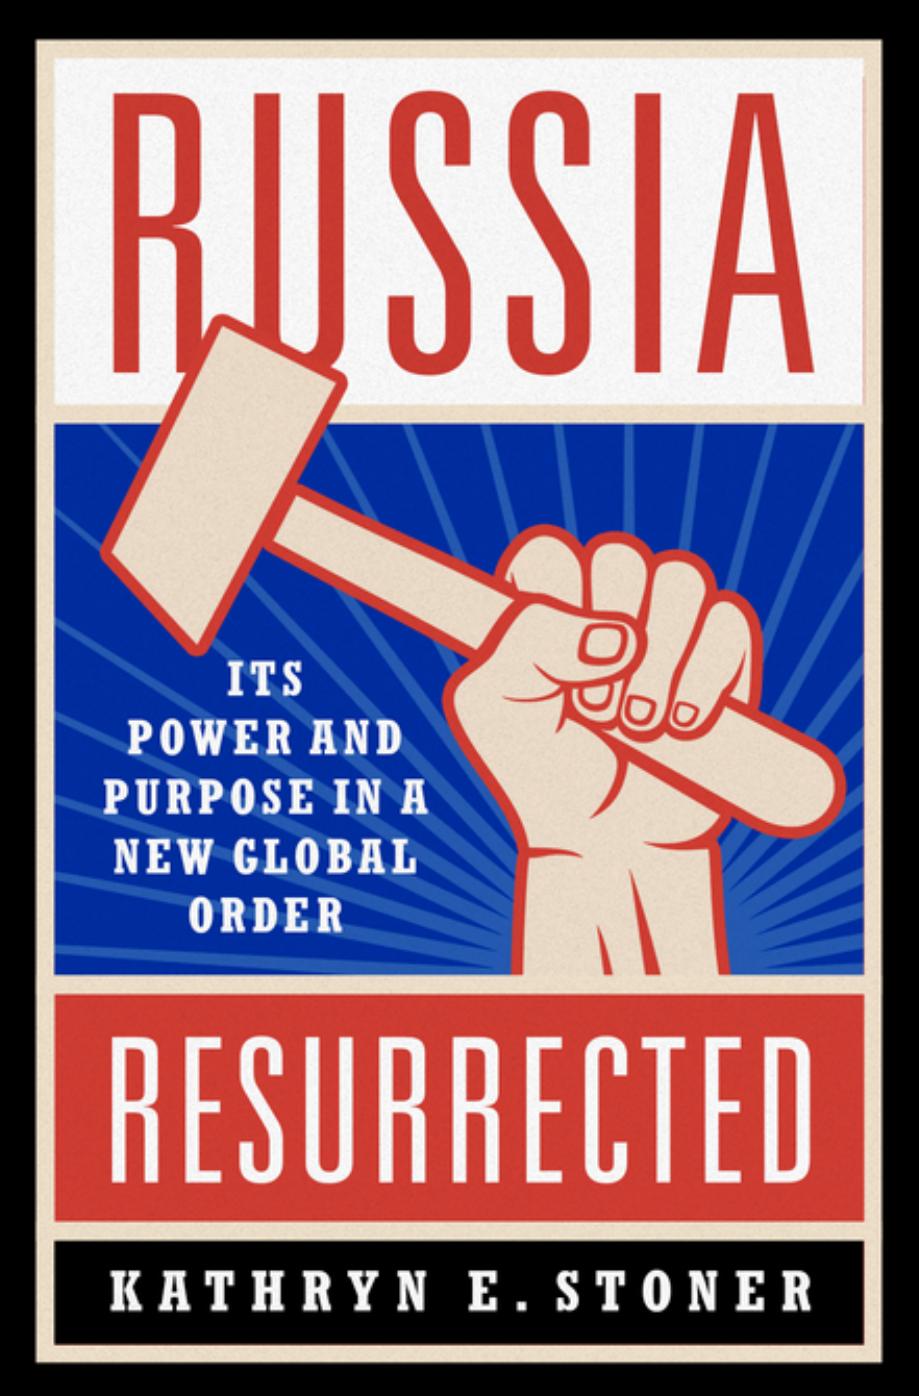 Russia Resurrected by Kathryn E. Stoner;